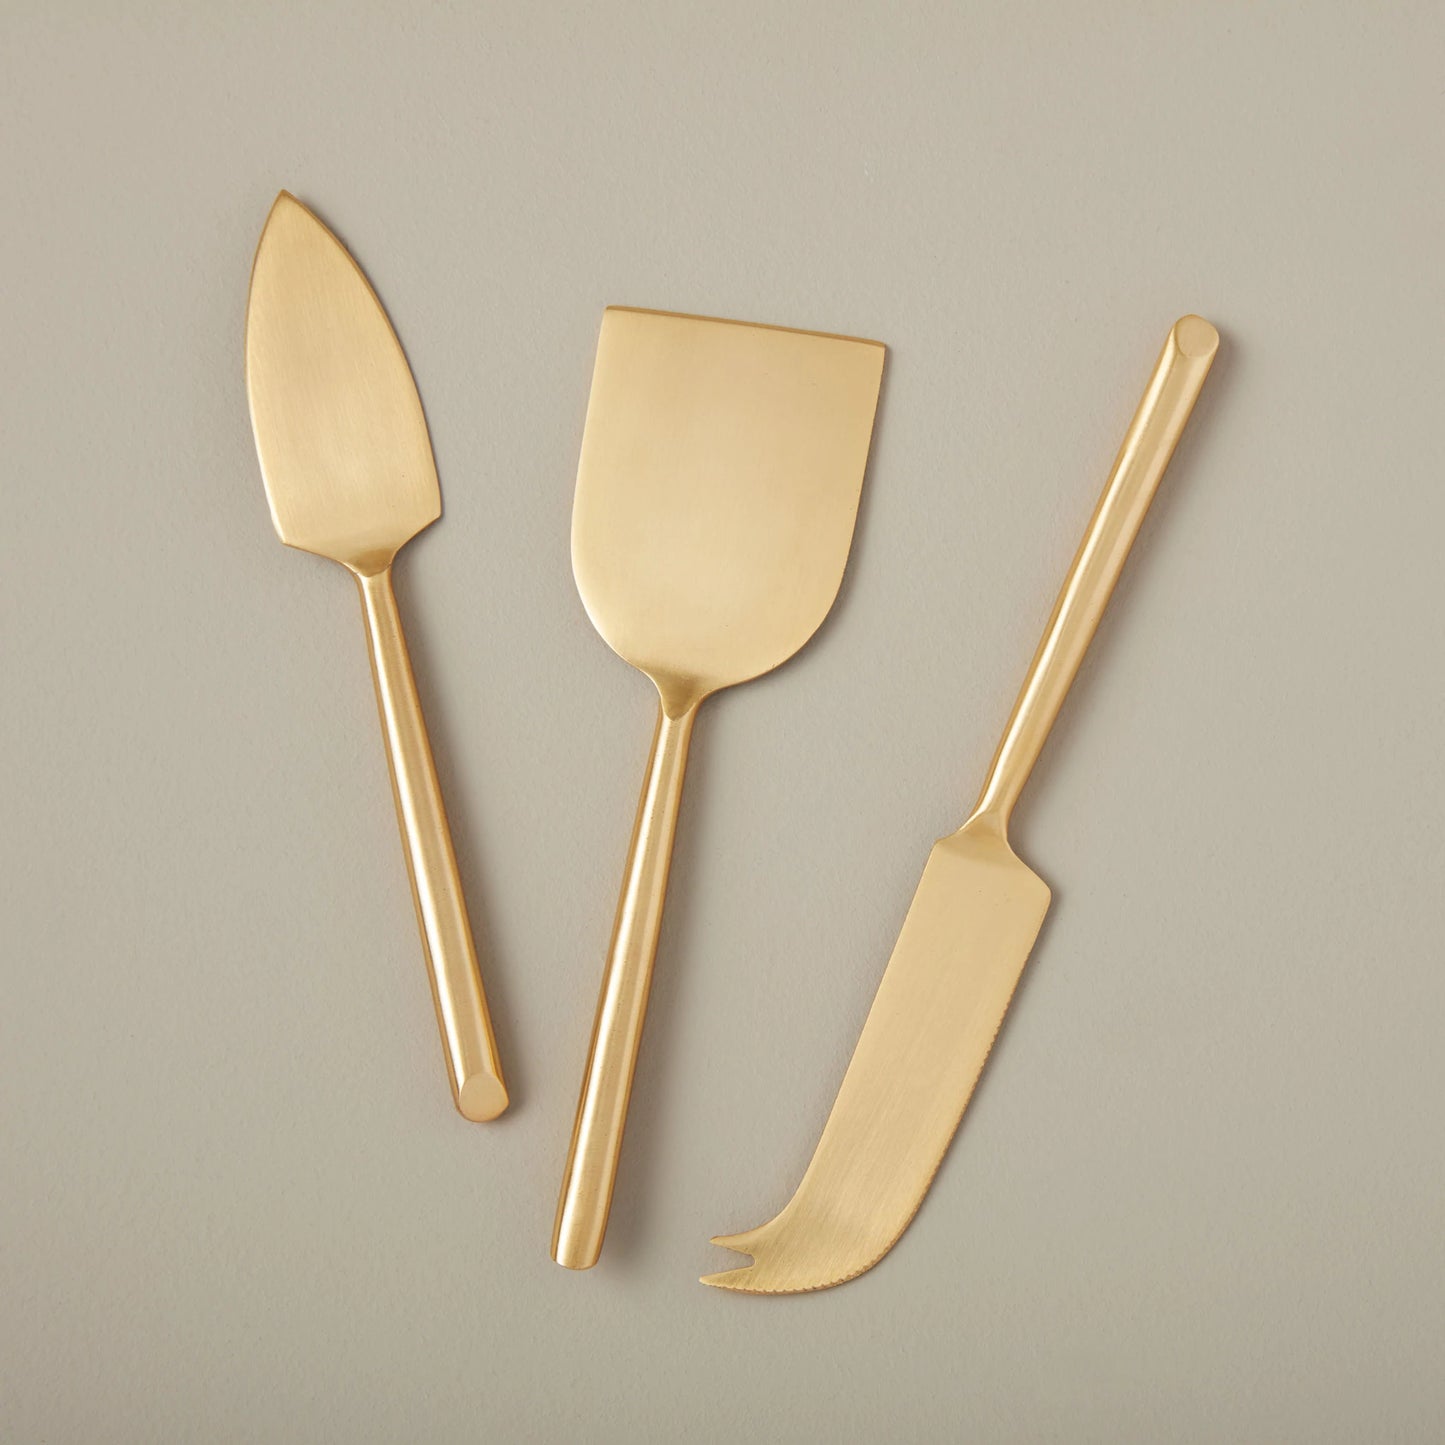 Matte Gold Cheese Knives Set of 3 - Be Home